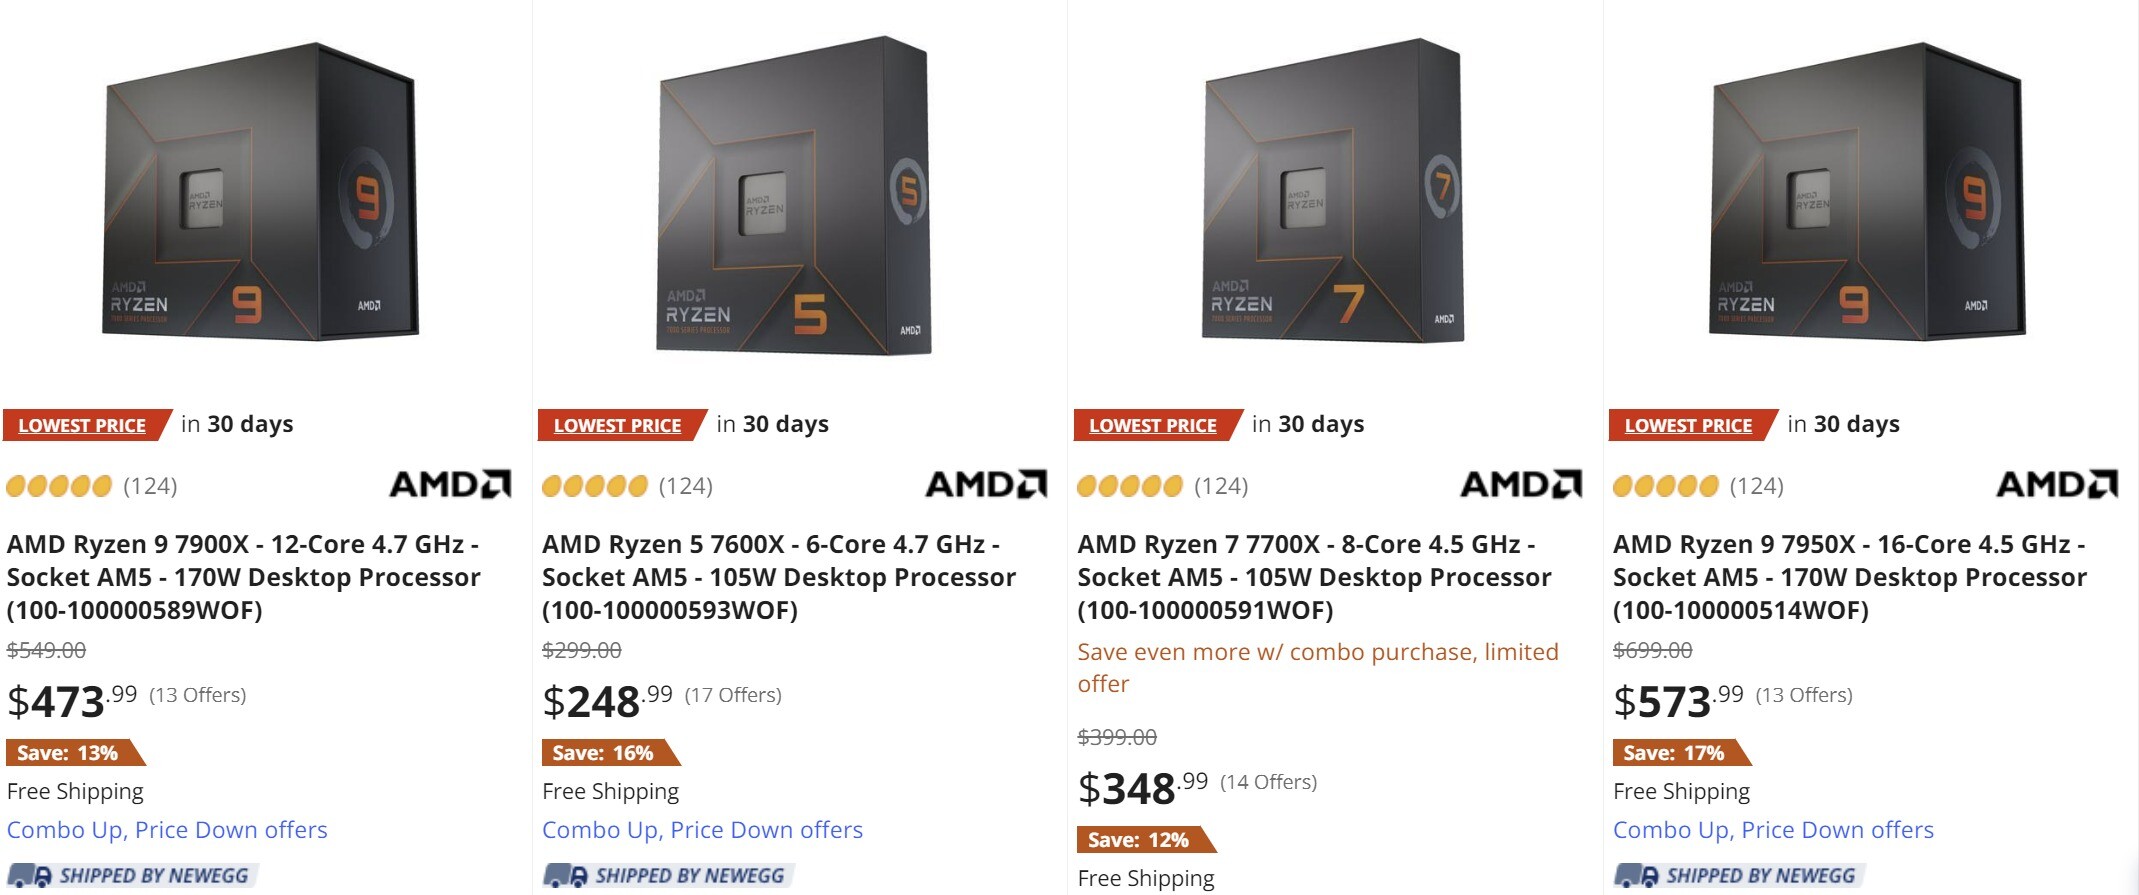 AMD Ryzen 7 7700X drops to lowest price ever thanks to 26